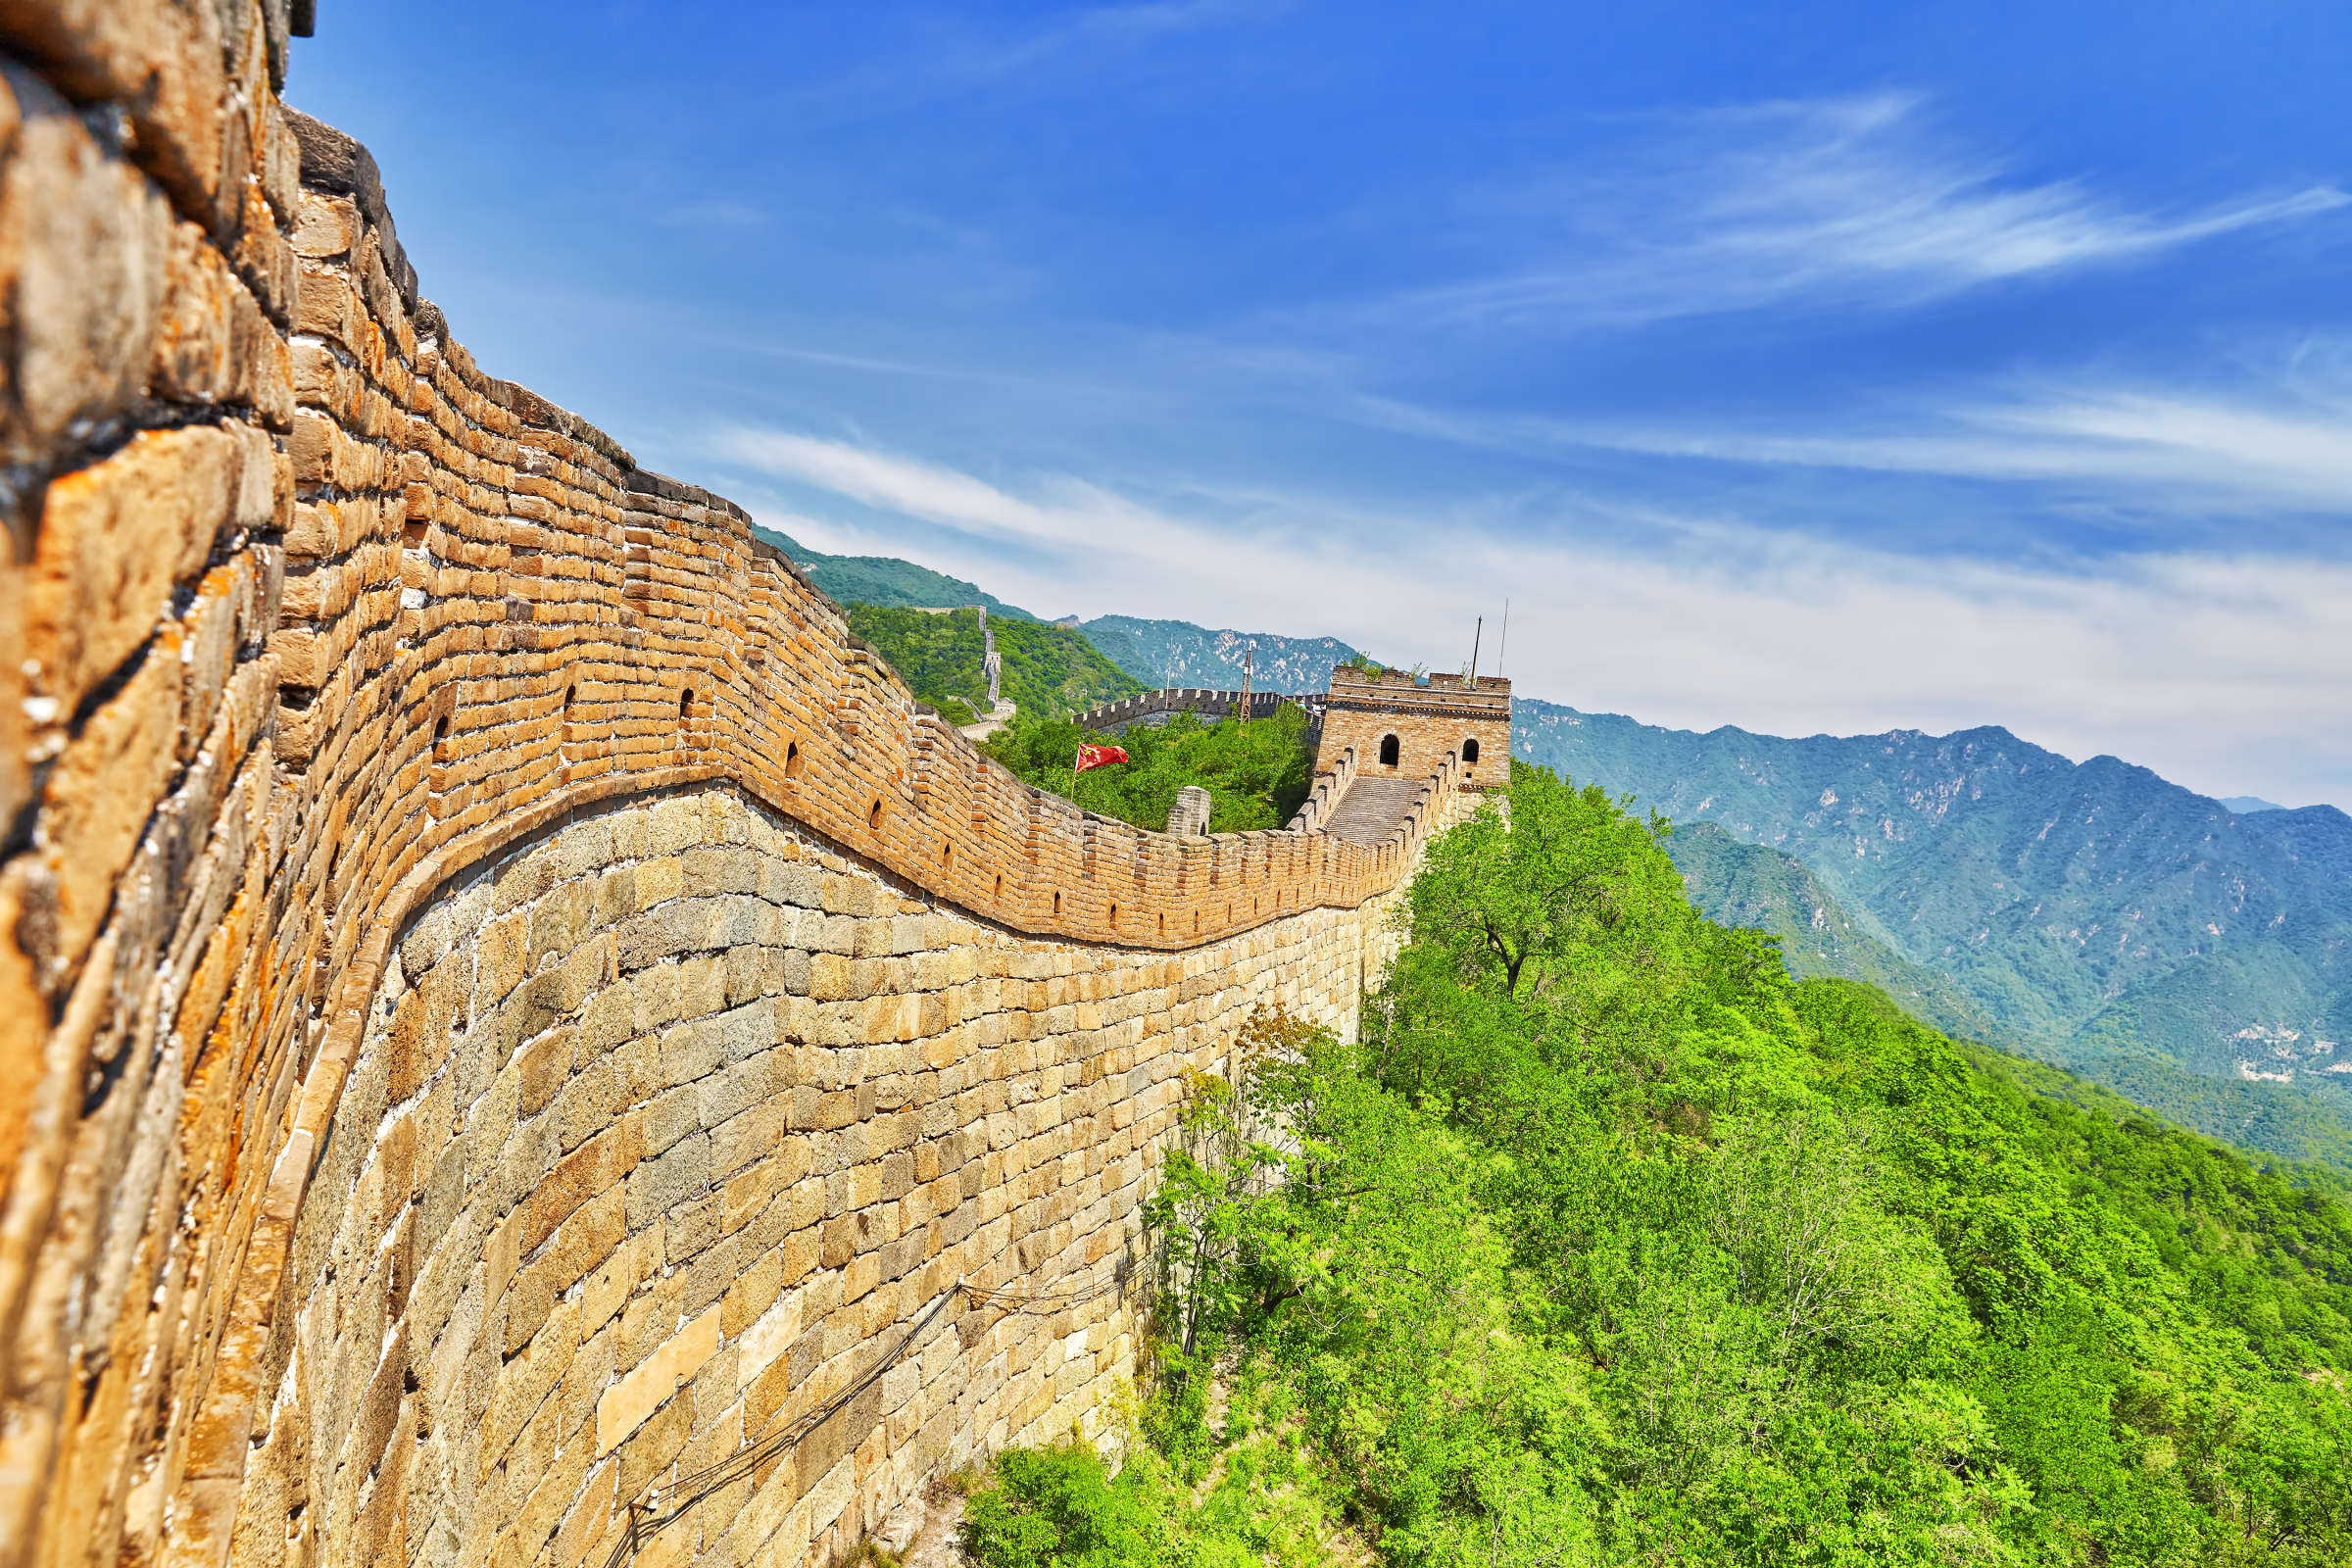 great wall of china tour